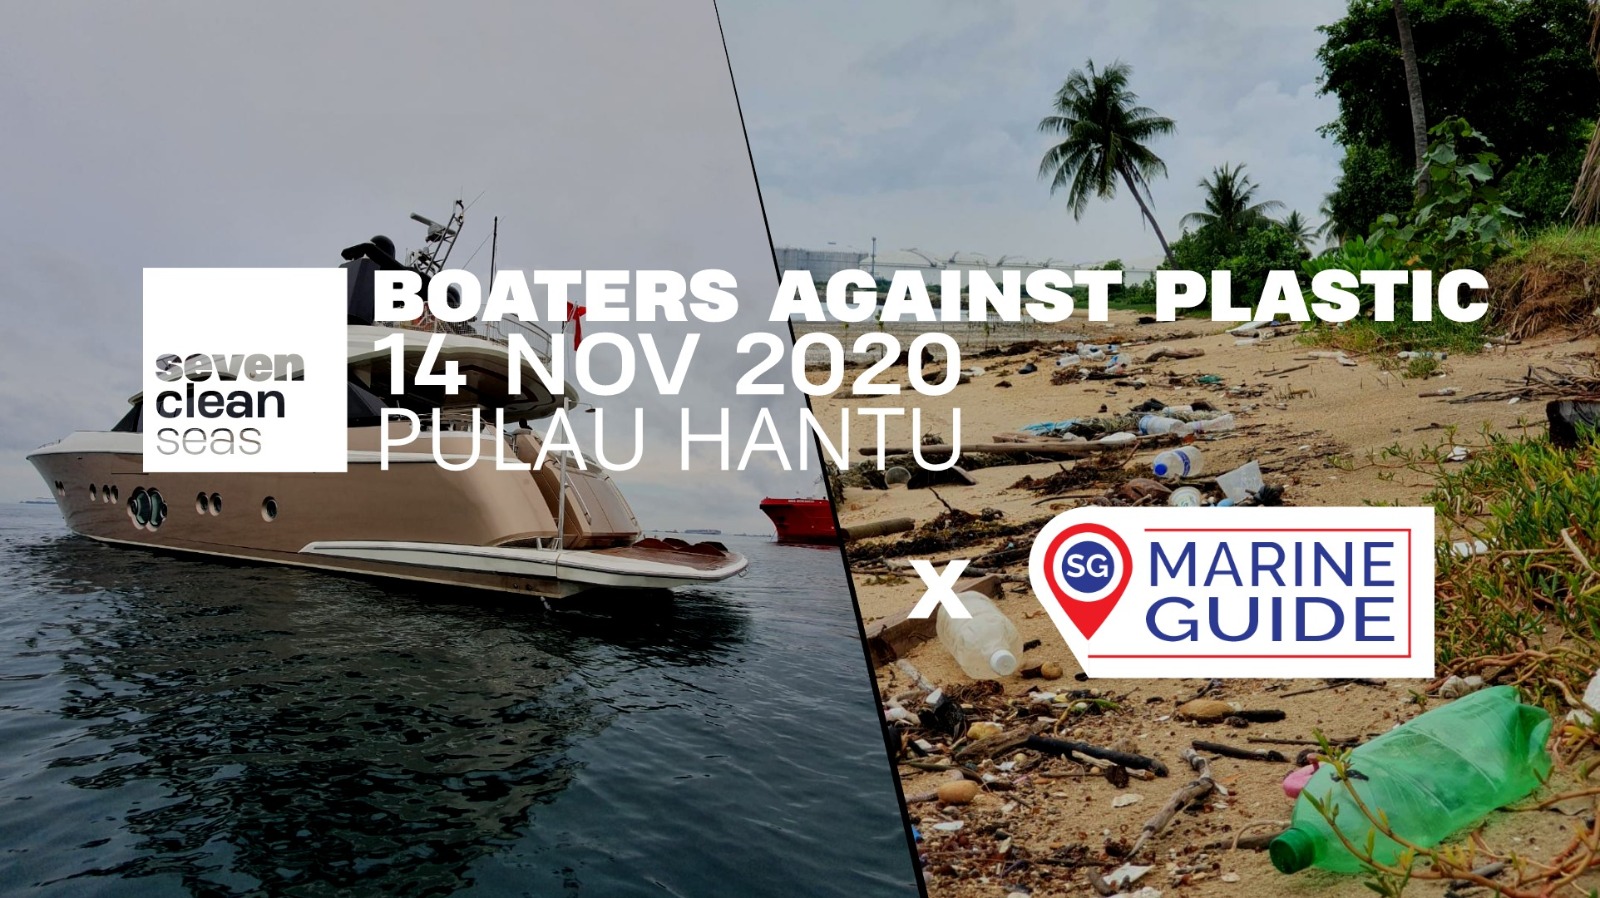 Boaters Against Plastic